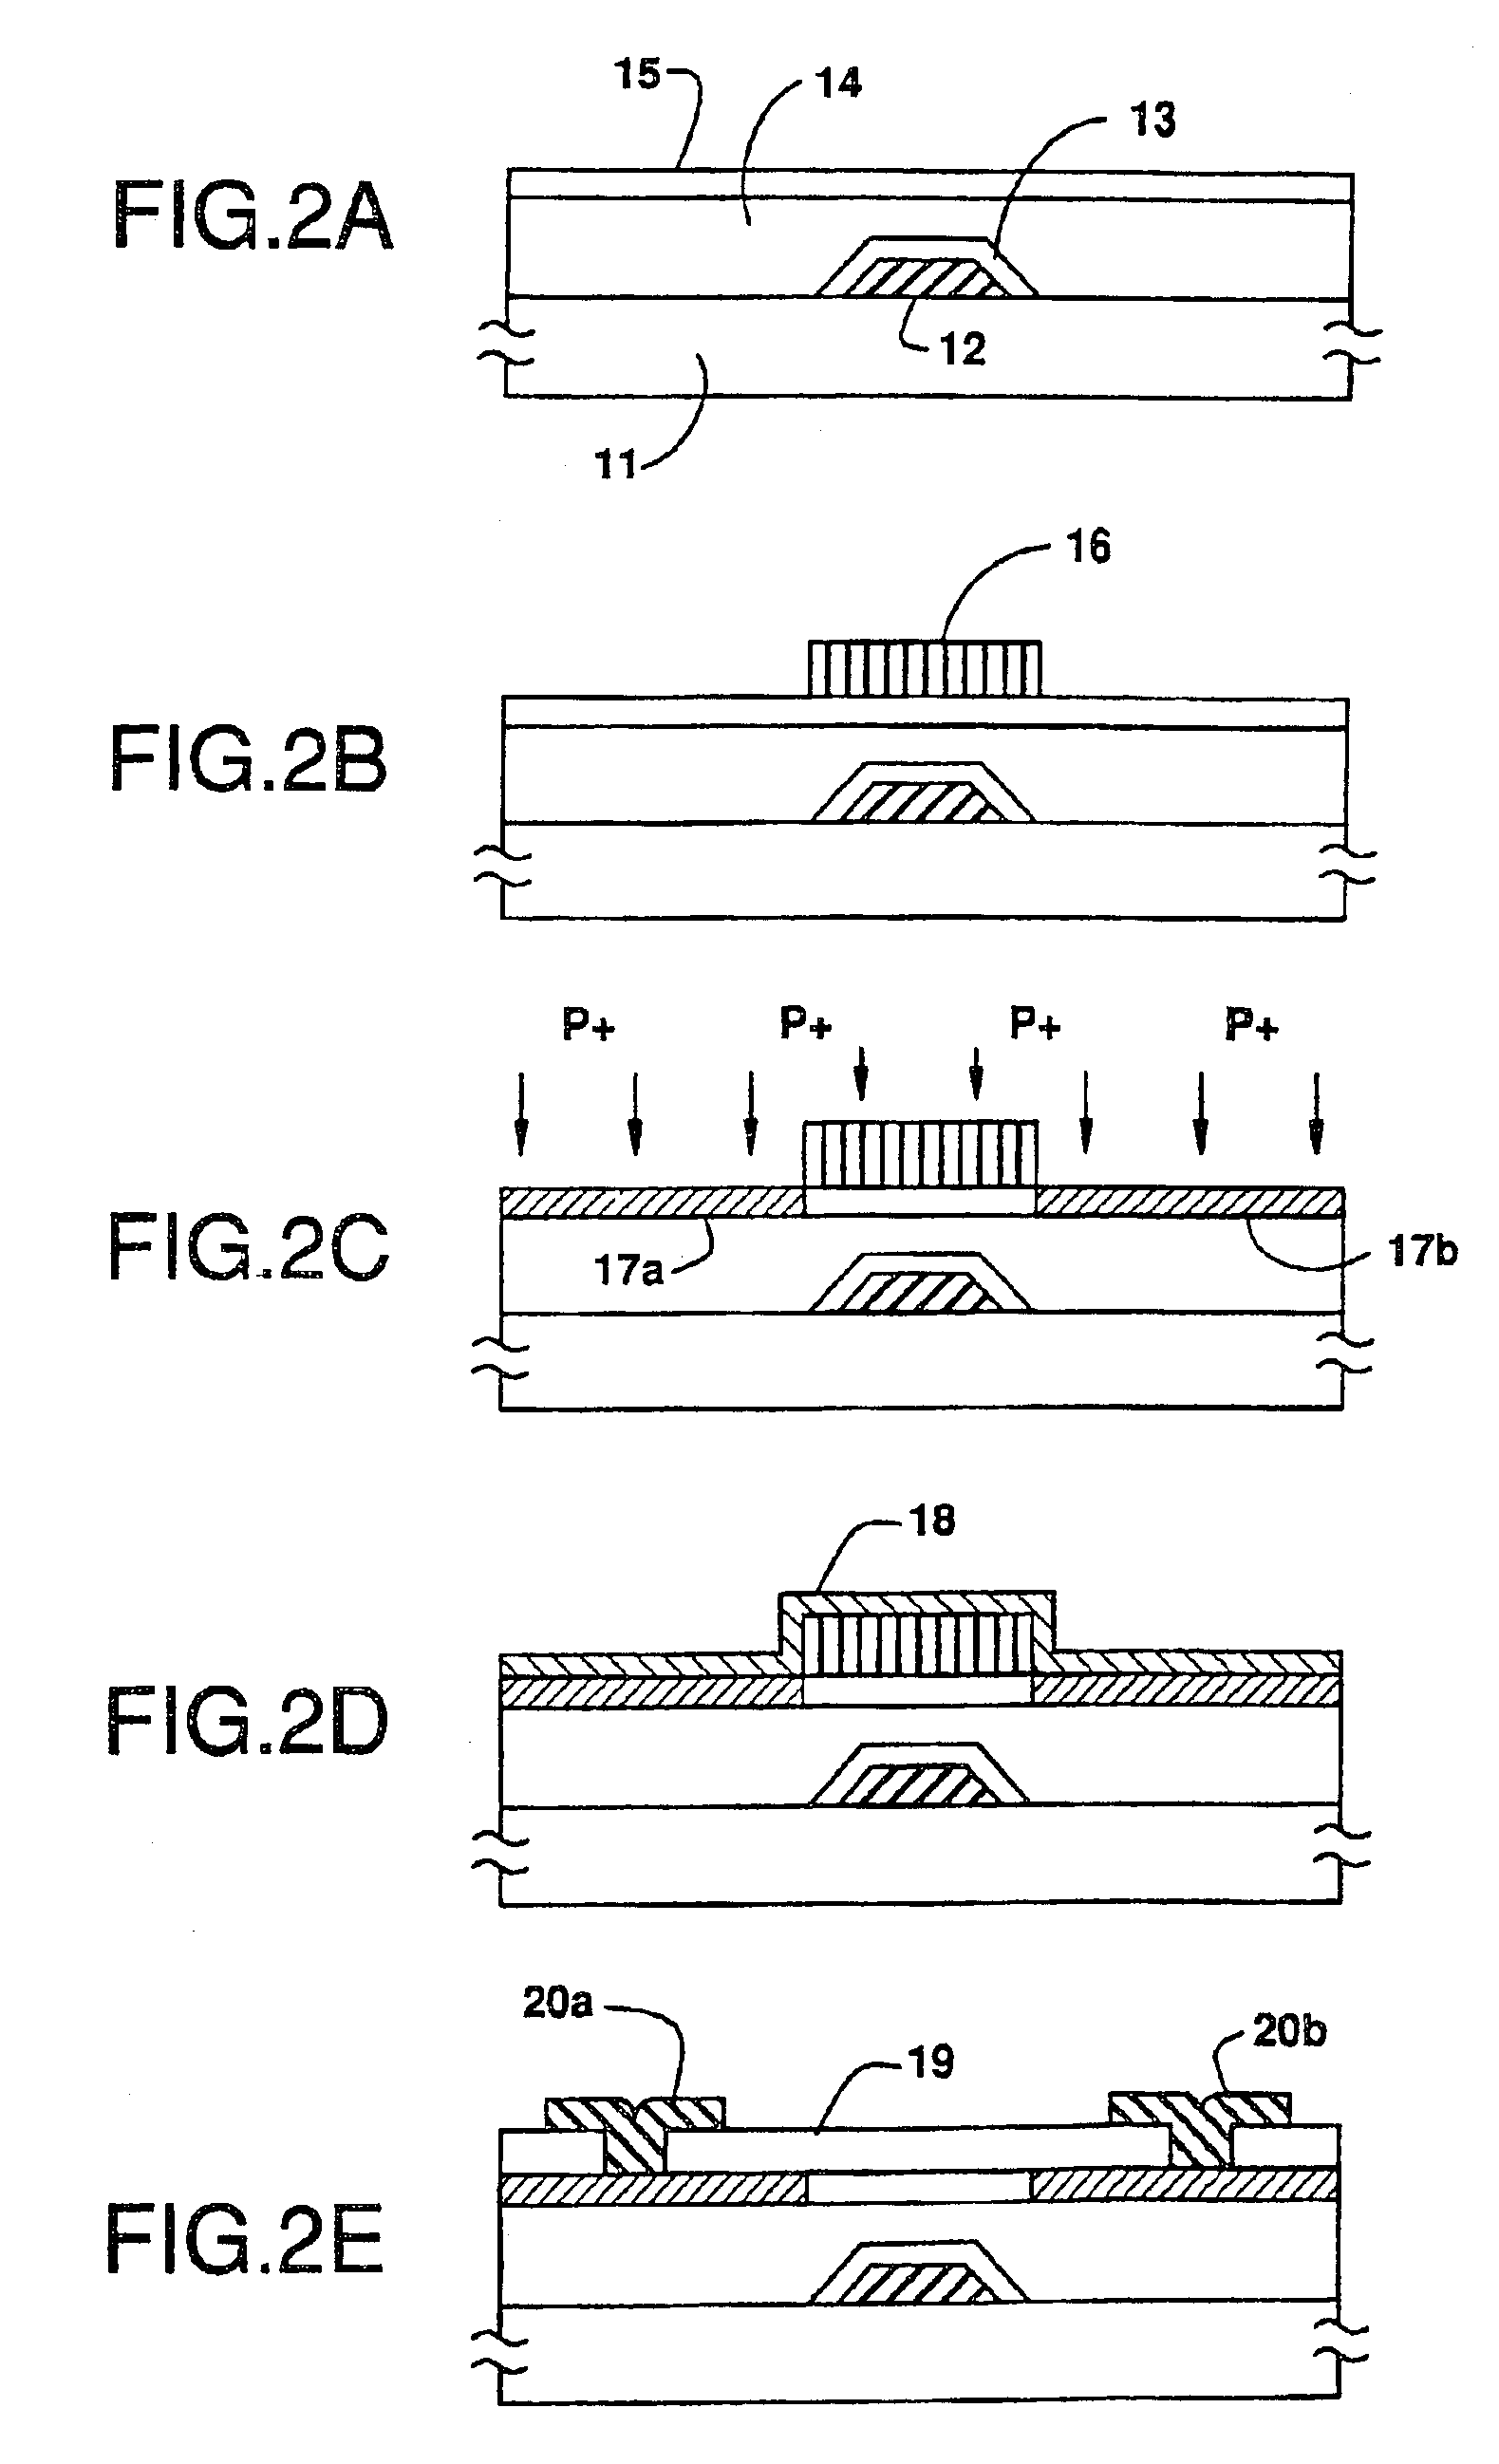 Method of manufacturing a semiconductor device that includes heating the gate insulating film